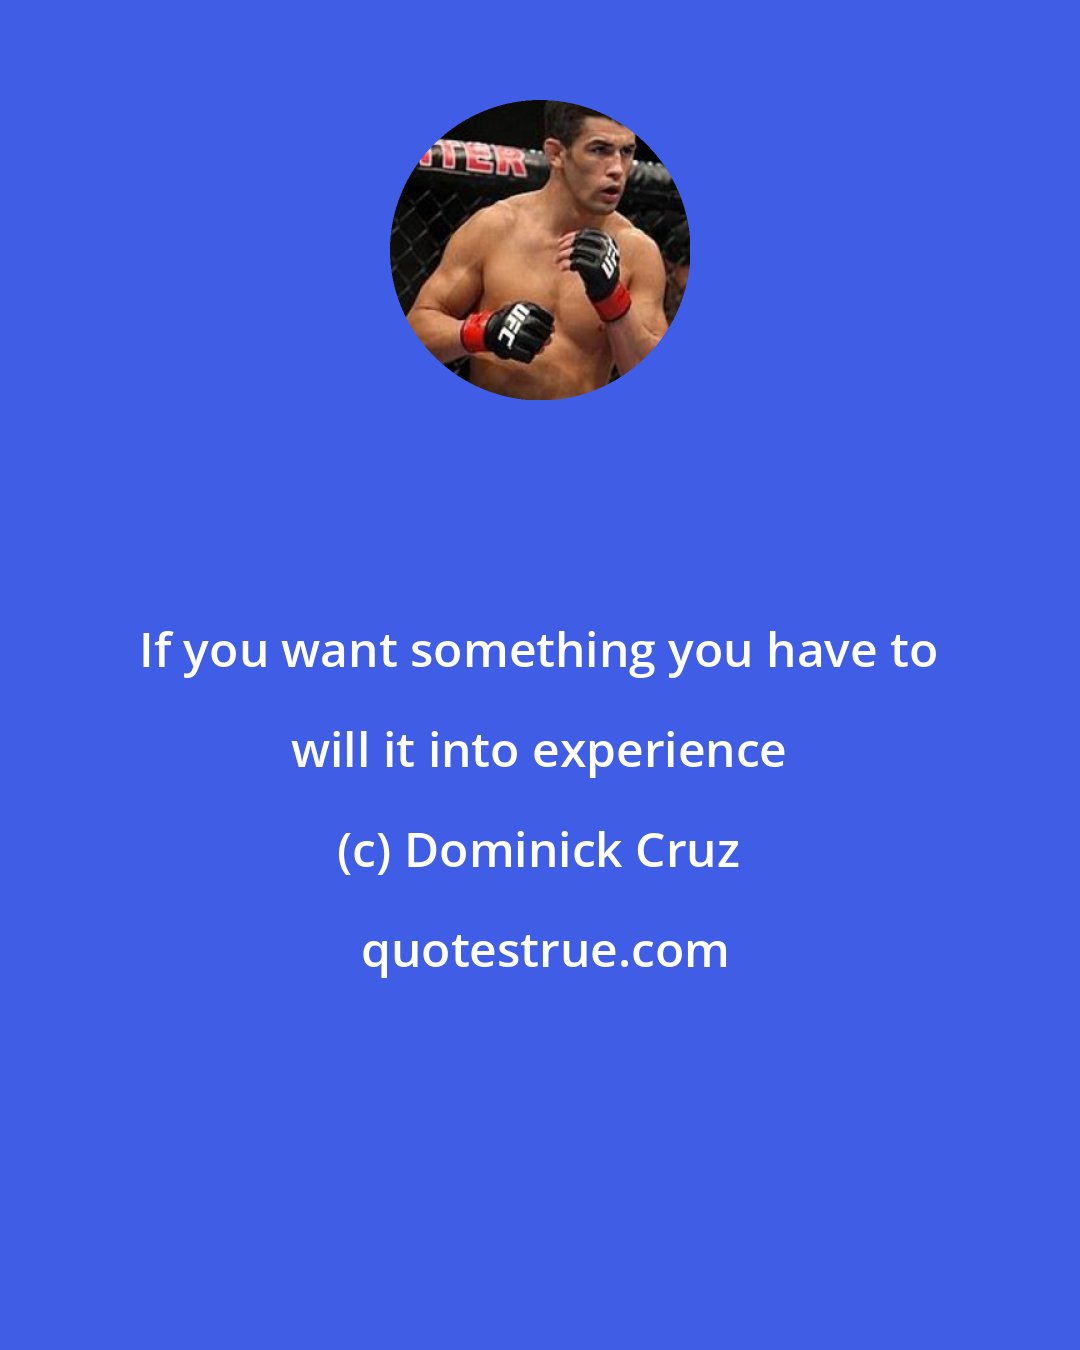 Dominick Cruz: If you want something you have to will it into experience